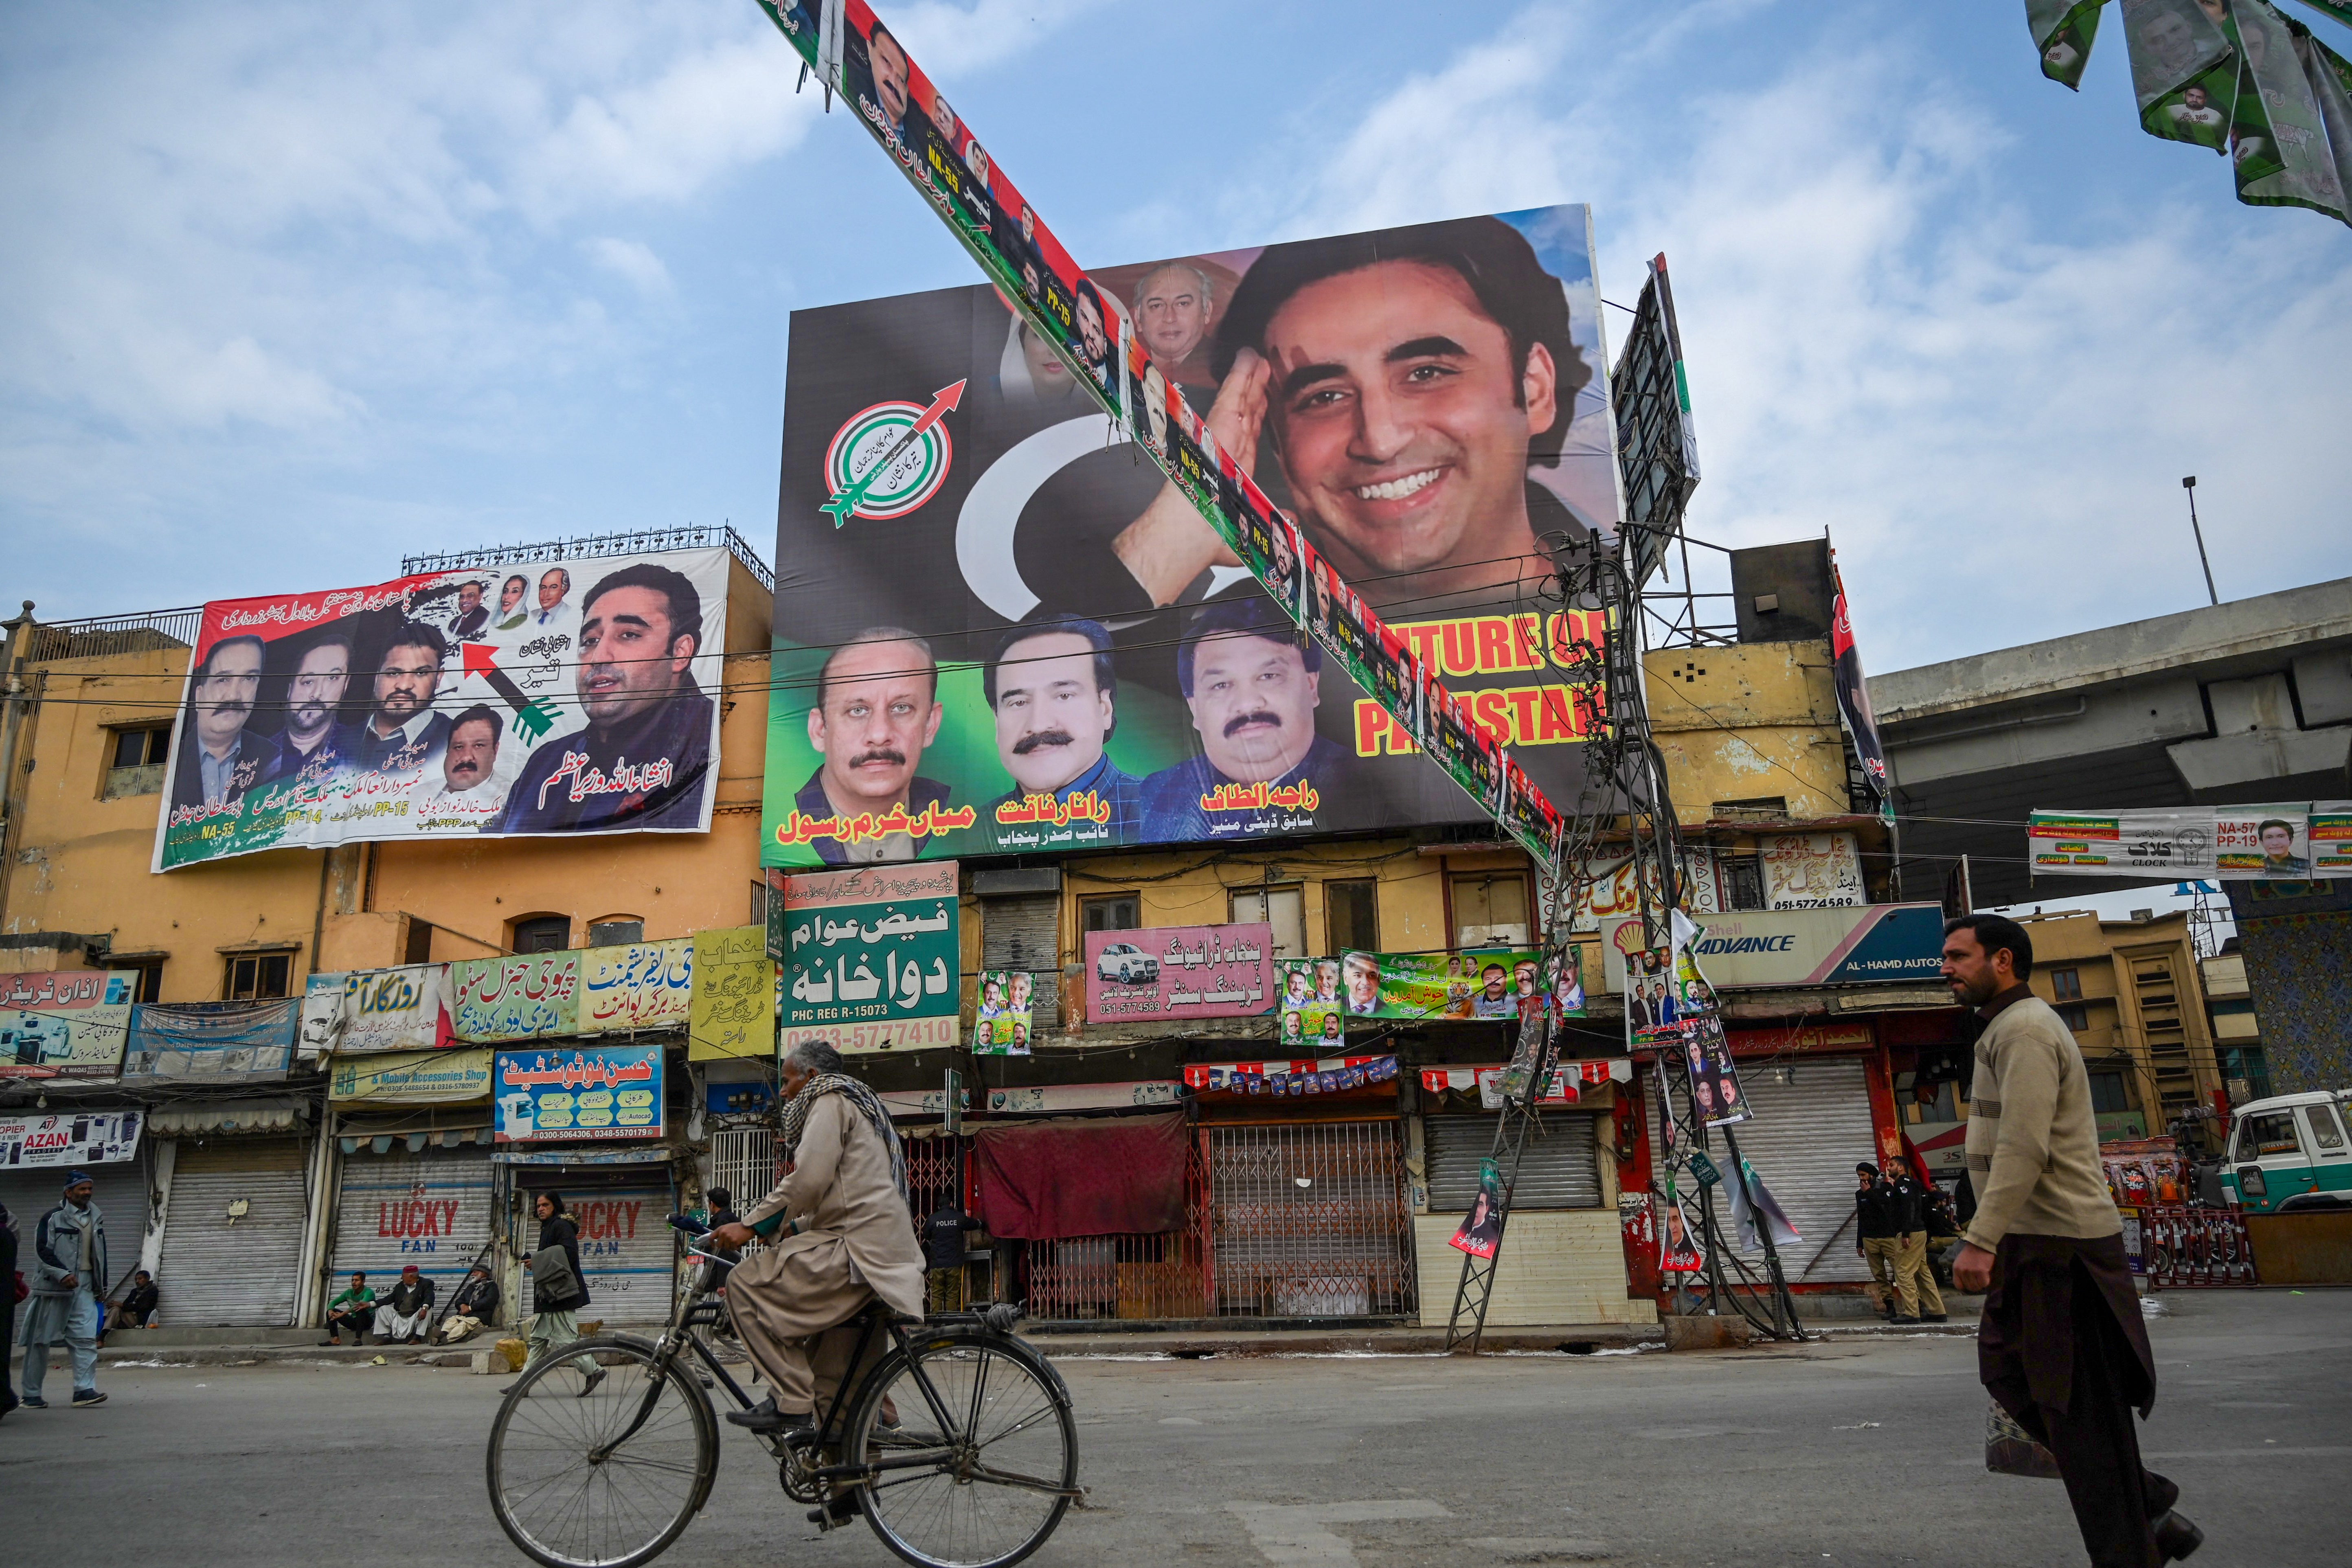 Election posters for Pakistan People’s Party (PPP) chairman Bilawal Bhutto Zardari in Rawalpindi